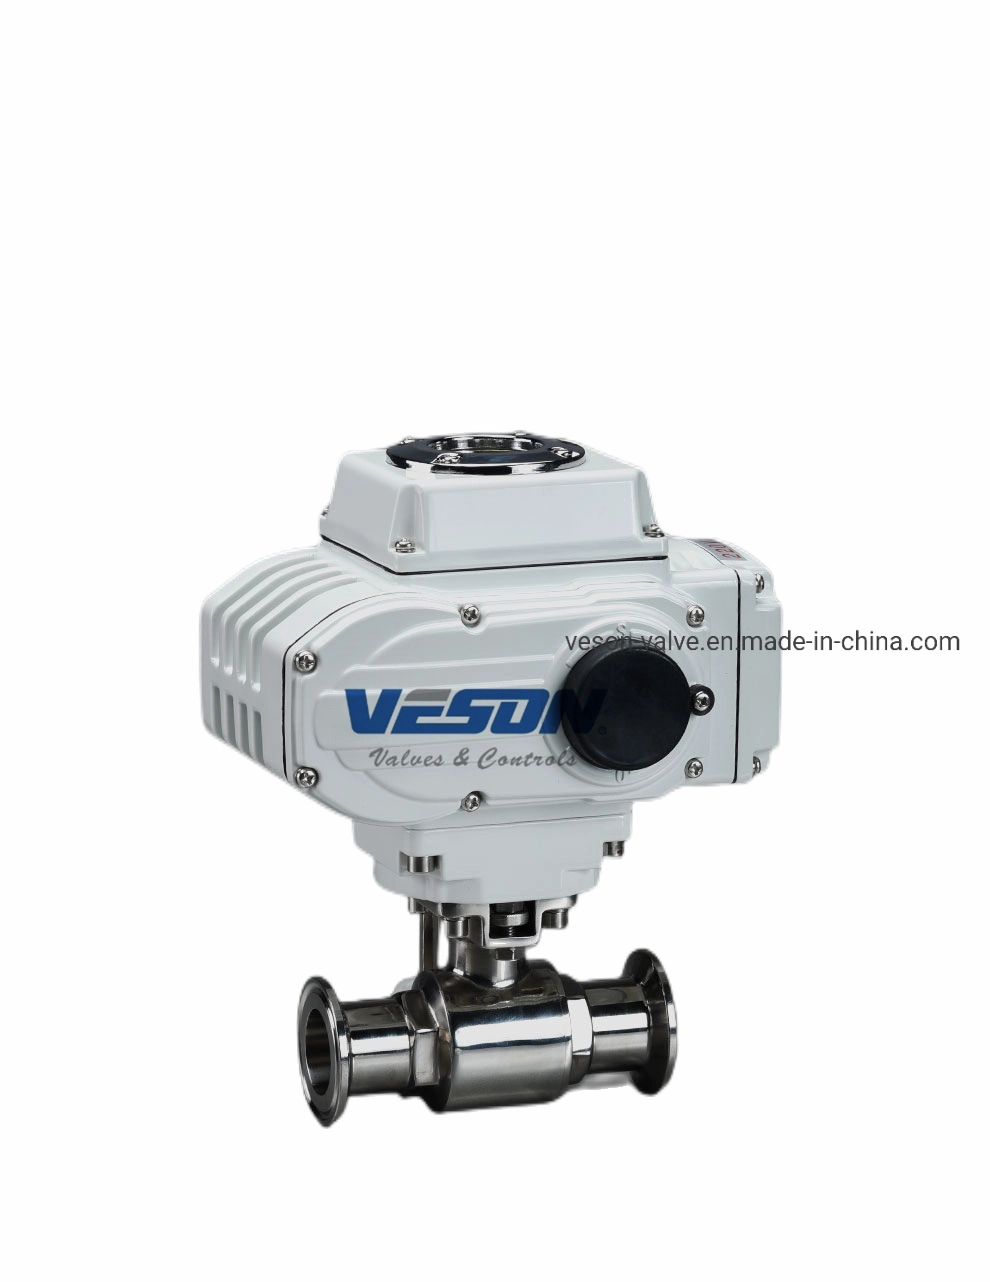 2 Way 2" PVC Electric Ball Valve, DC12V Large Torque Motorized Valve with Manual Operation and Indicator